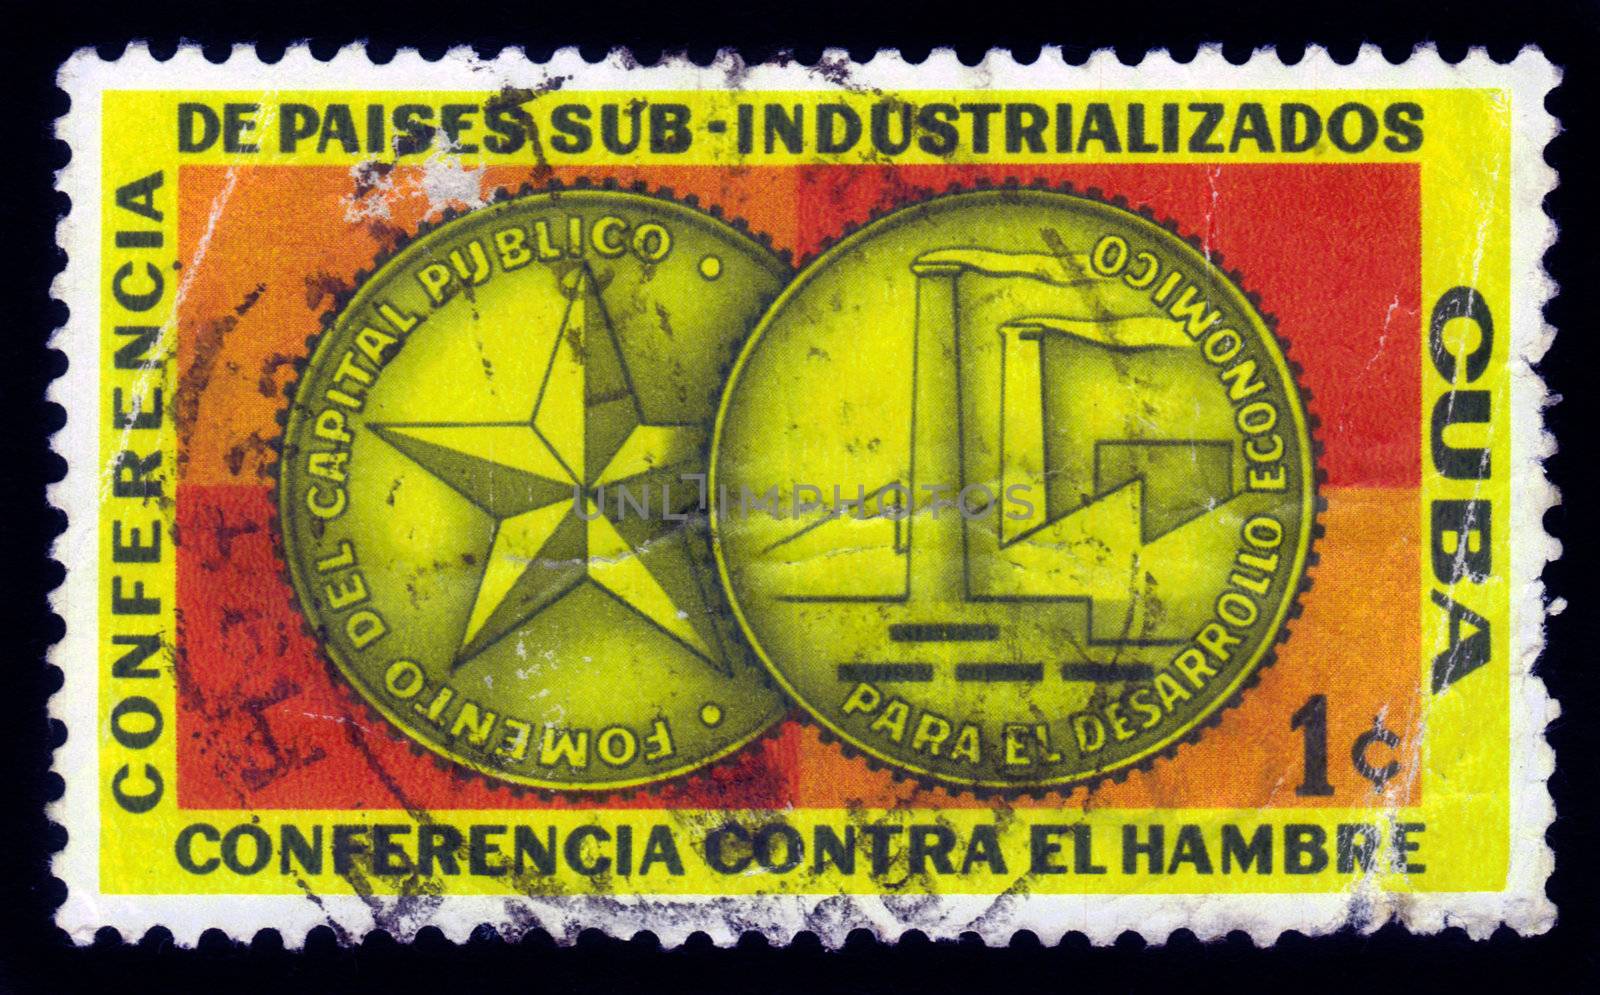 Cuba - CIRCA 1960: A stamp printed in Cuba shows medal dedicated to sub-industrialized countries conference in Havana, circa 1960